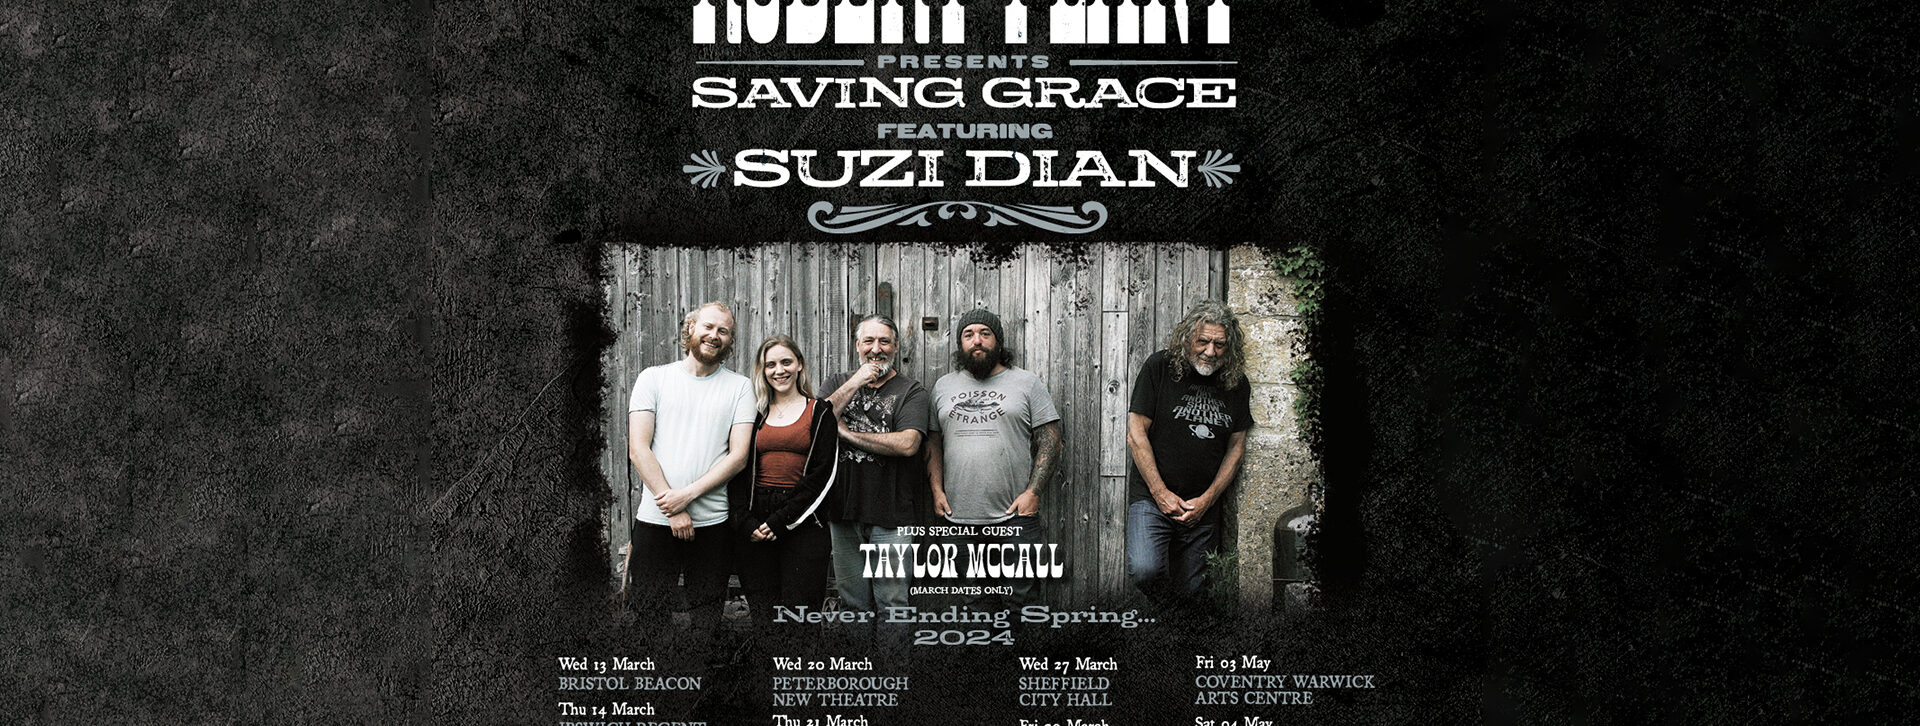 Robert Plant presents Saving Grace featuring Suzi Dian with Special Guest Taylor McCall